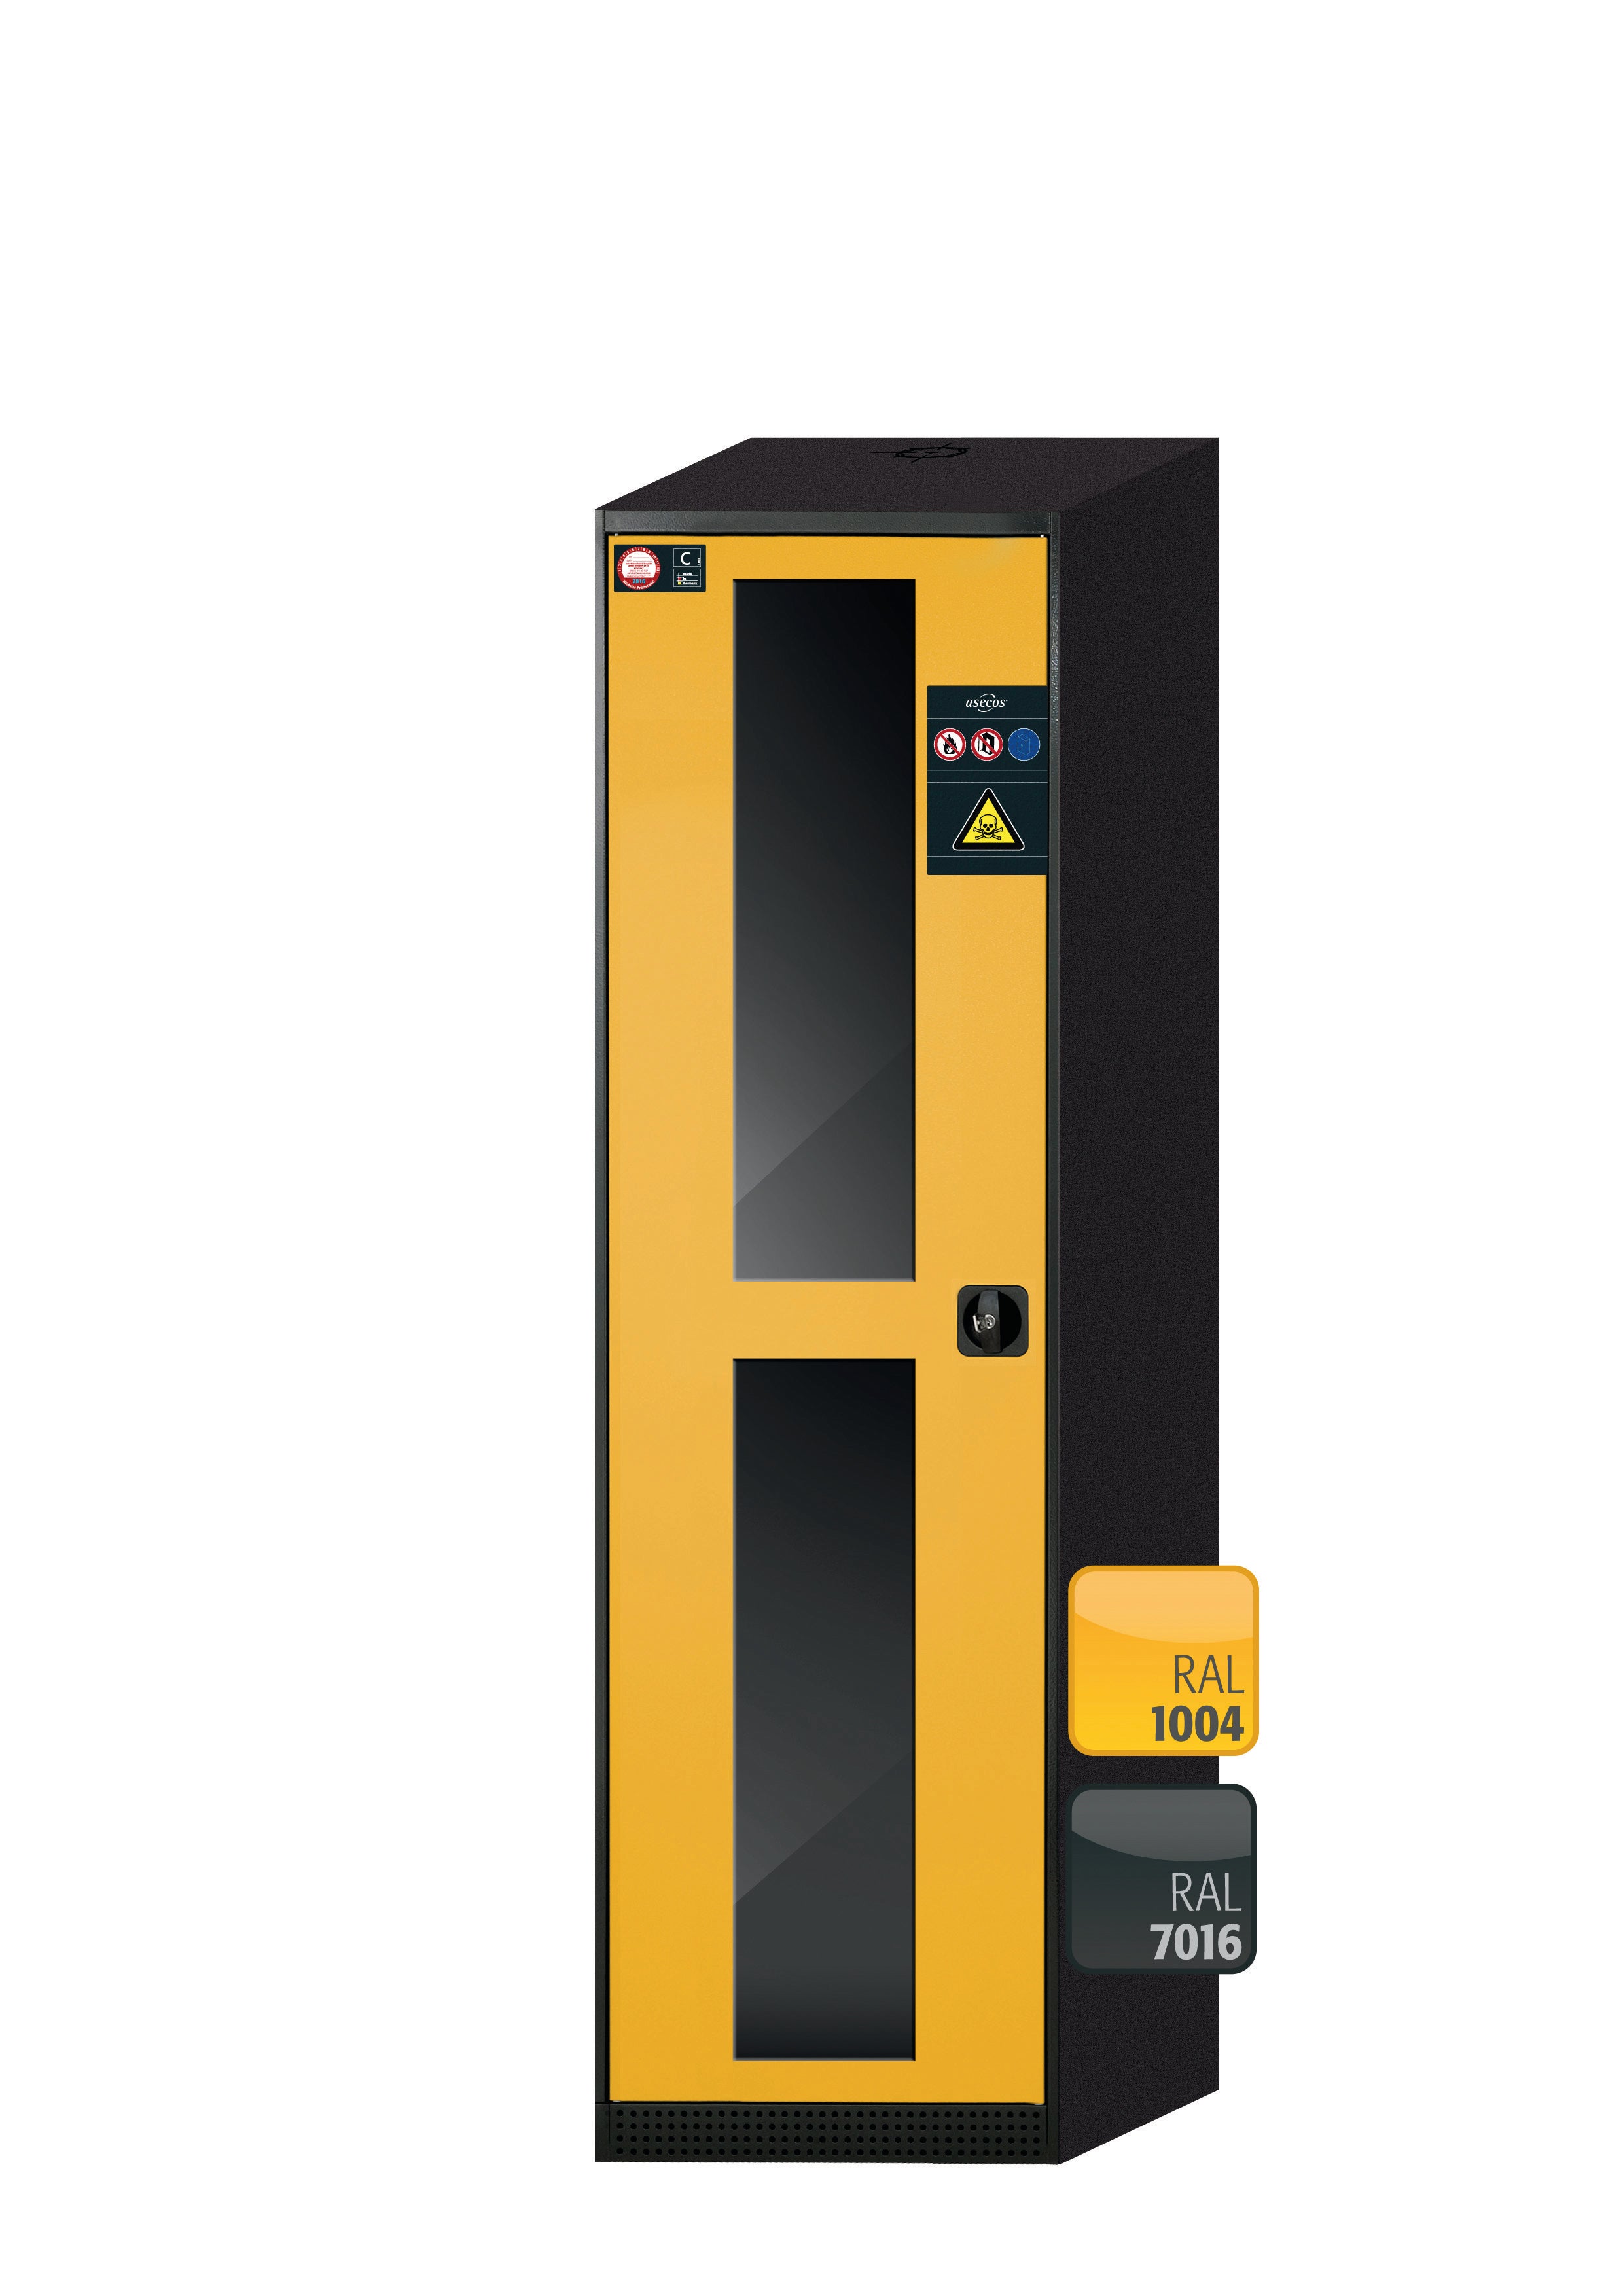 Chemical cabinet CS-CLASSIC-G model CS.195.054.WDFW in safety yellow RAL 1004 with 5x AbZ shelf pull-outs (sheet steel/polypropylene)